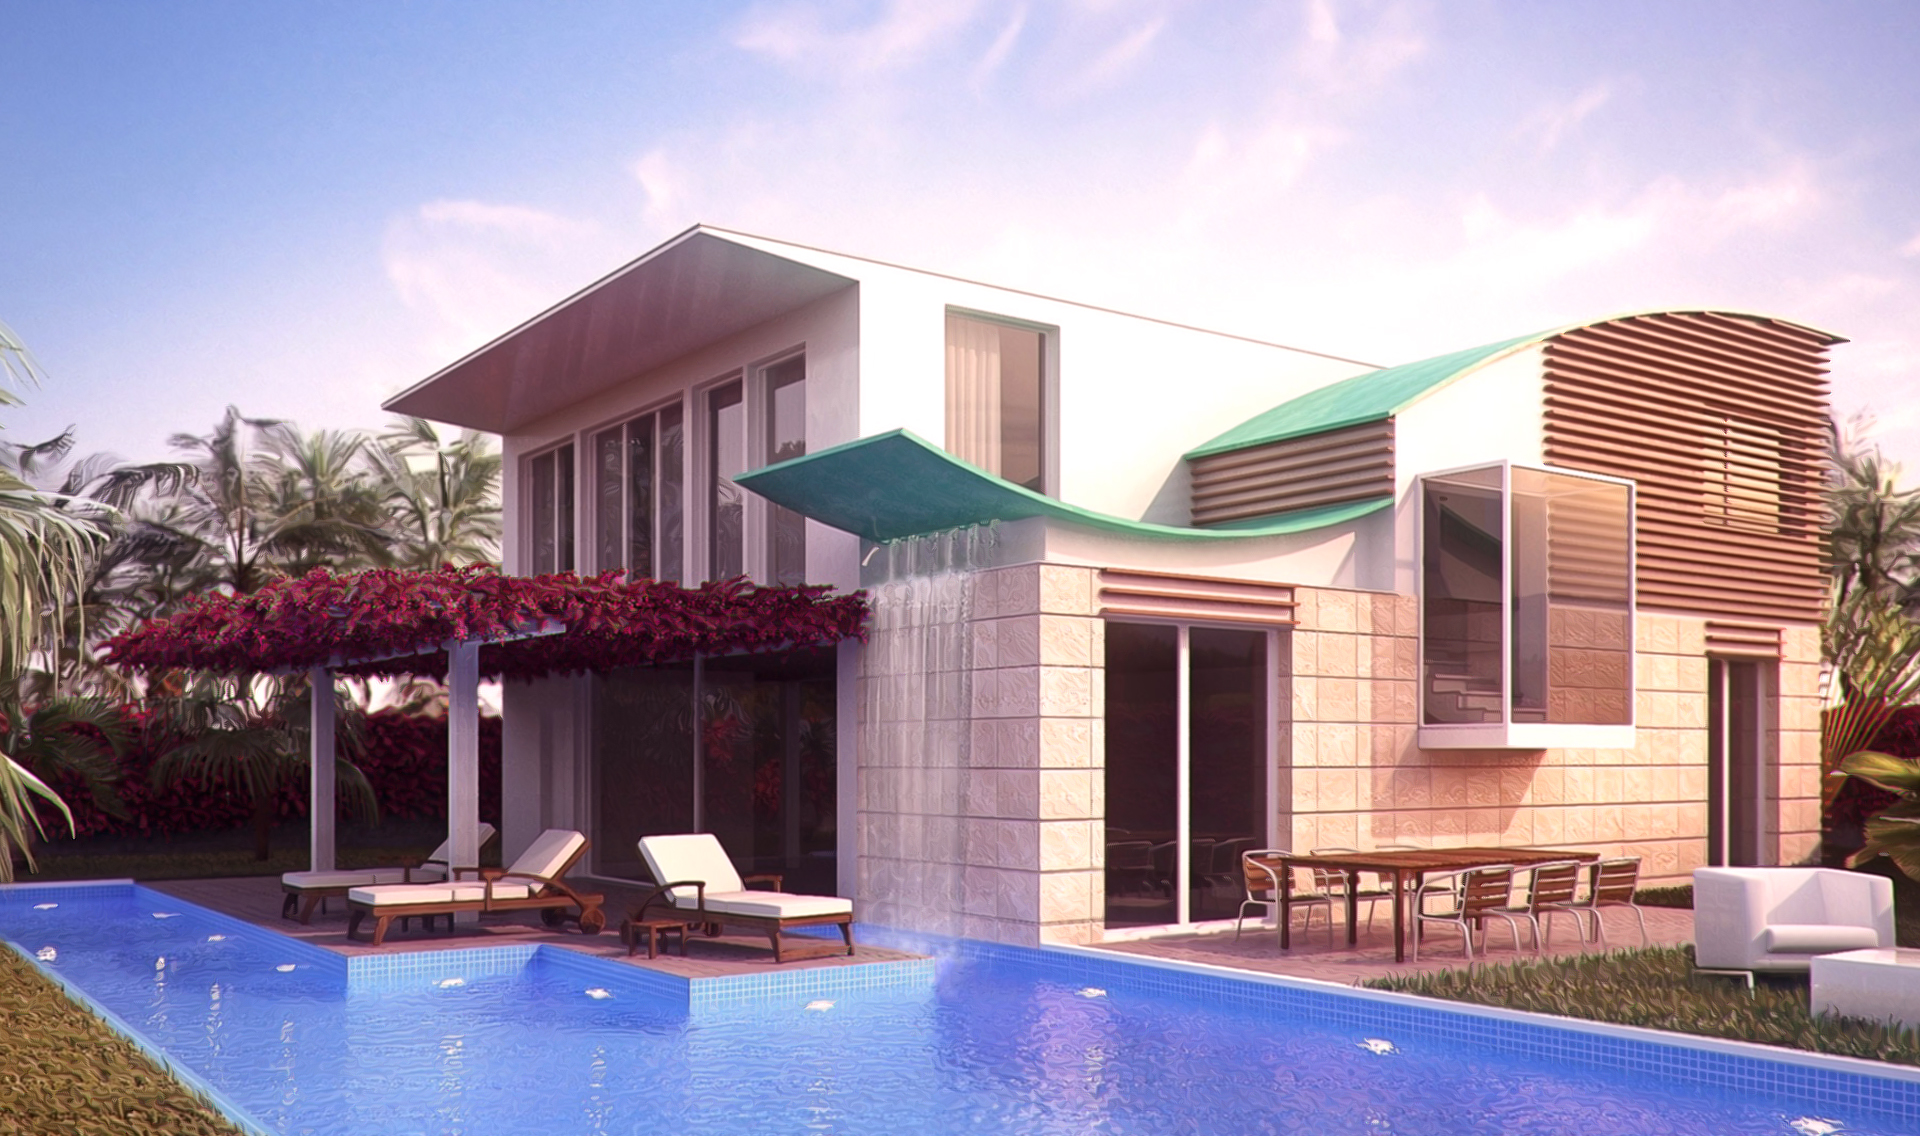 EXT. MODERN HOUSE WITH POOL – DAY